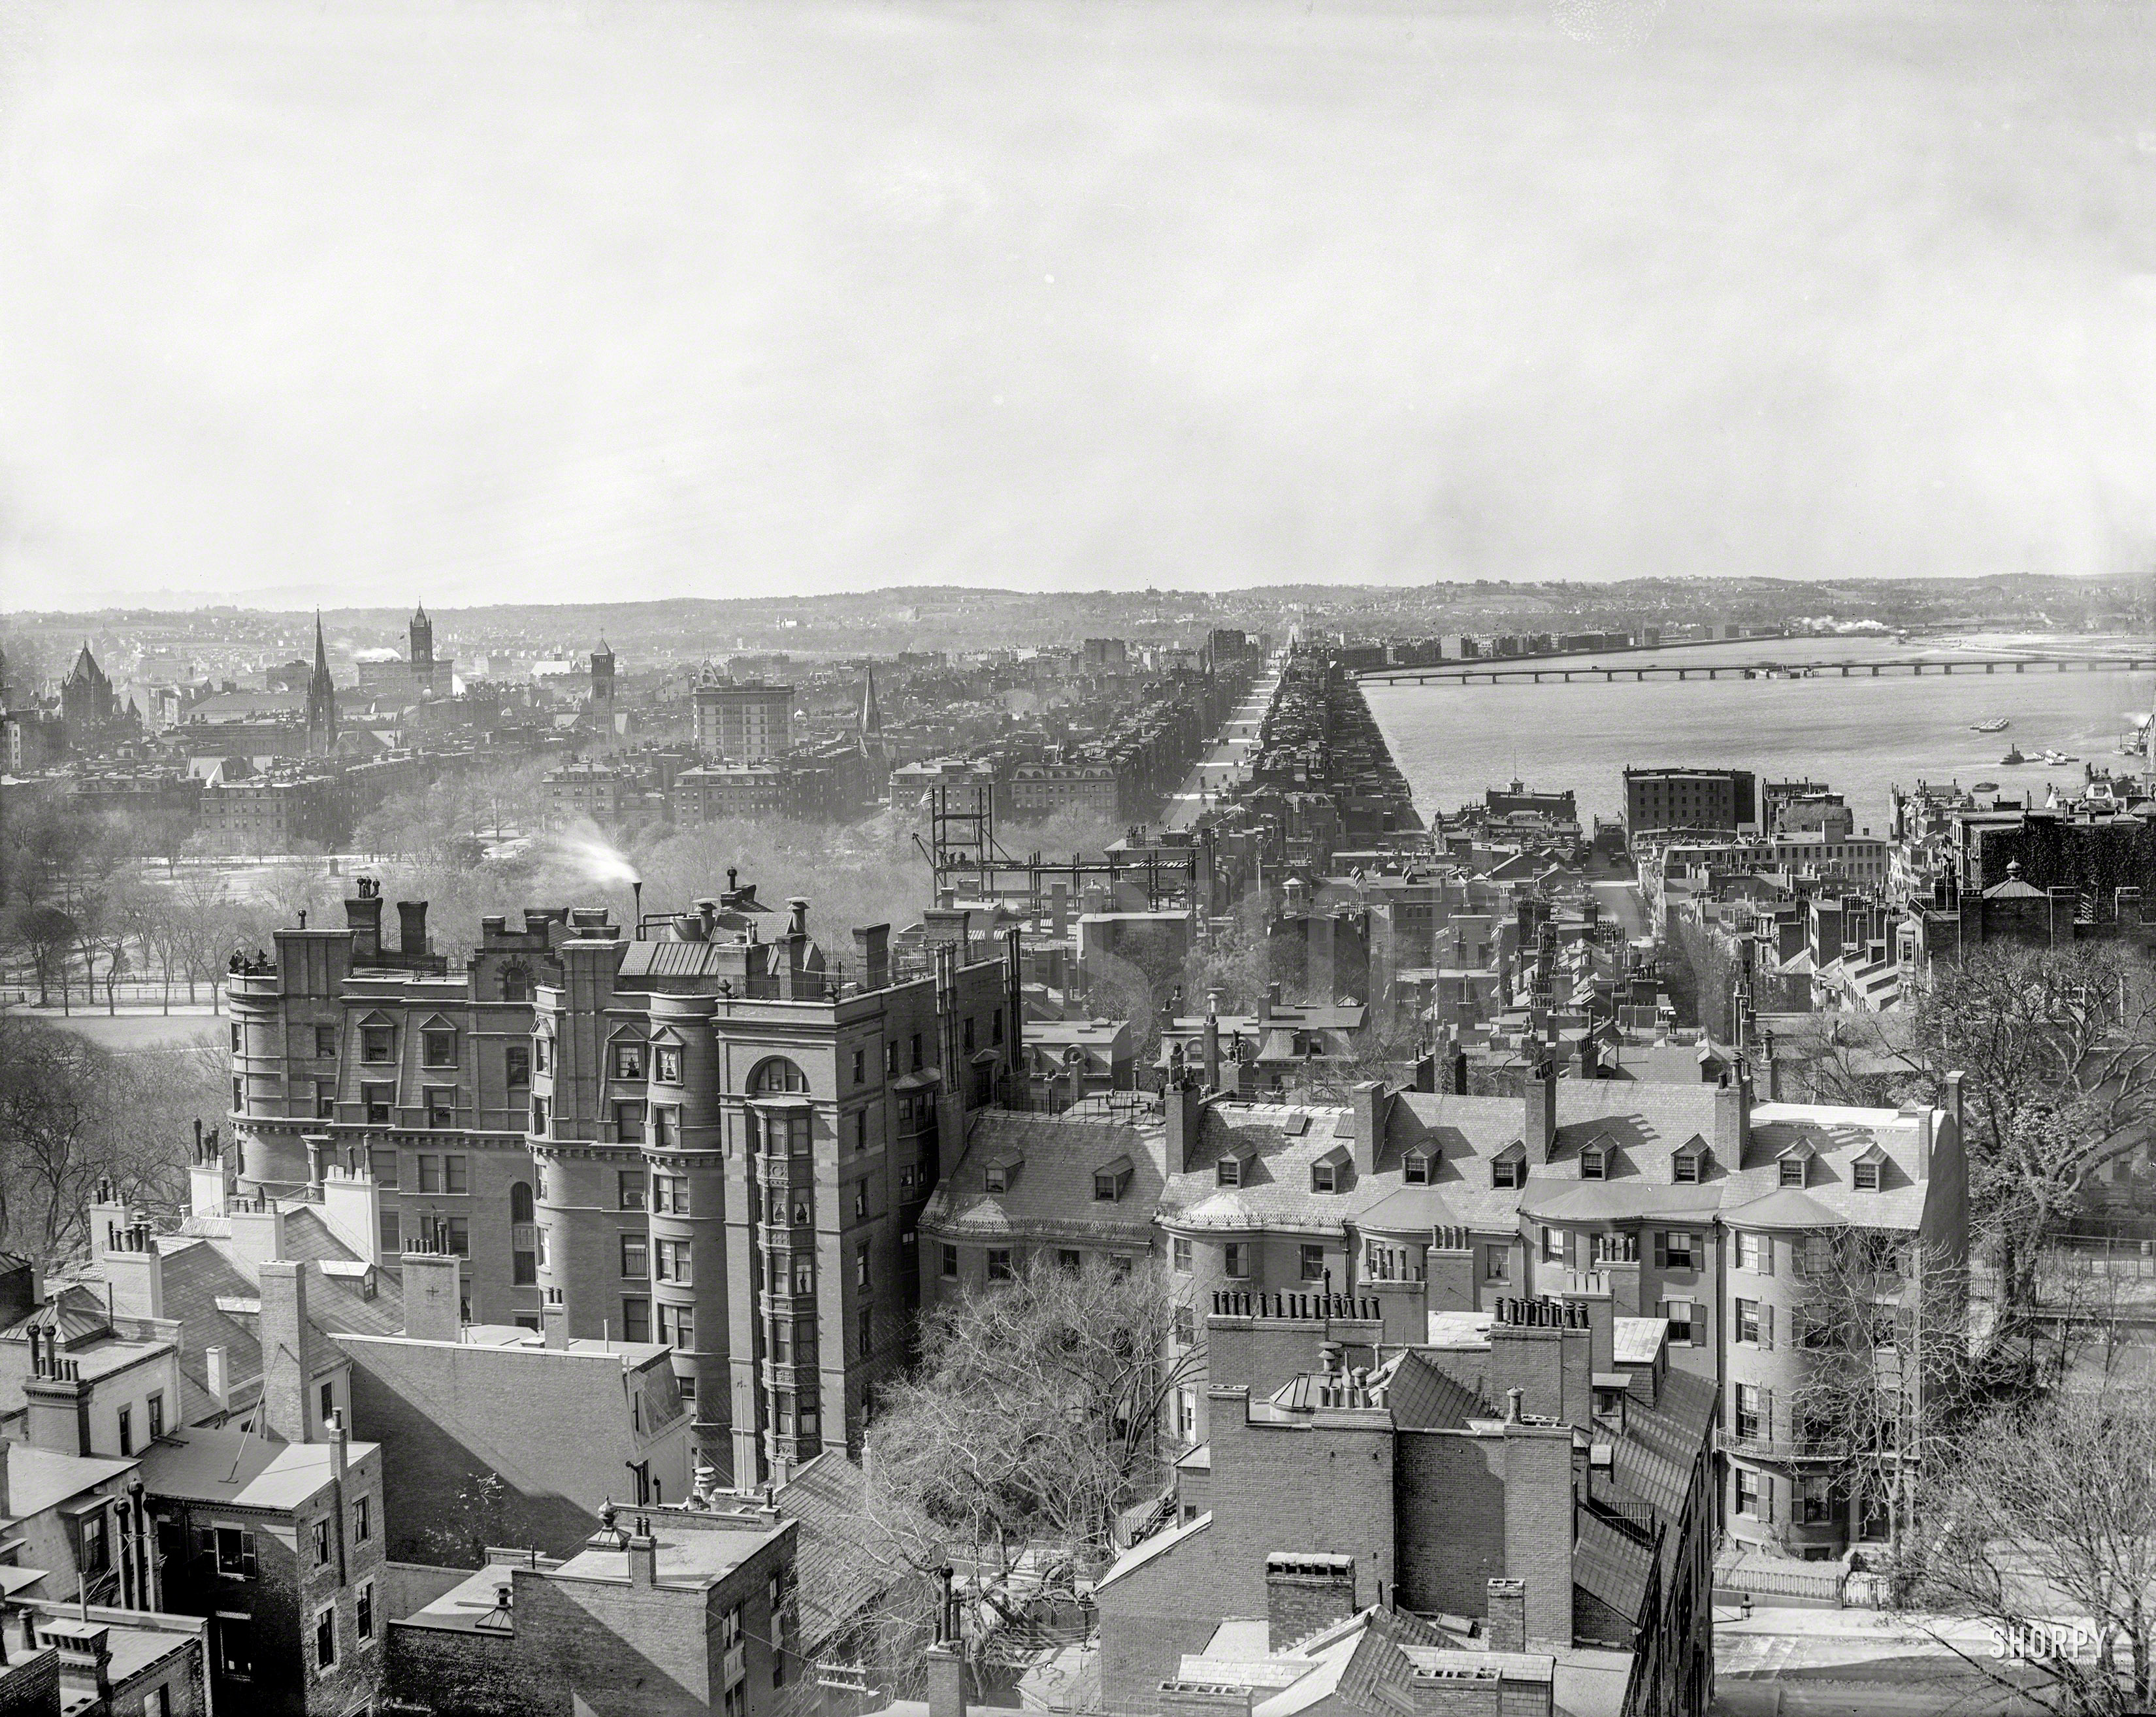 Circa 1904. "Boston, Massachusetts. Back Bay from the State House dome." 8x10 inch dry plate glass negative, Detroit Publishing Company. View full size.